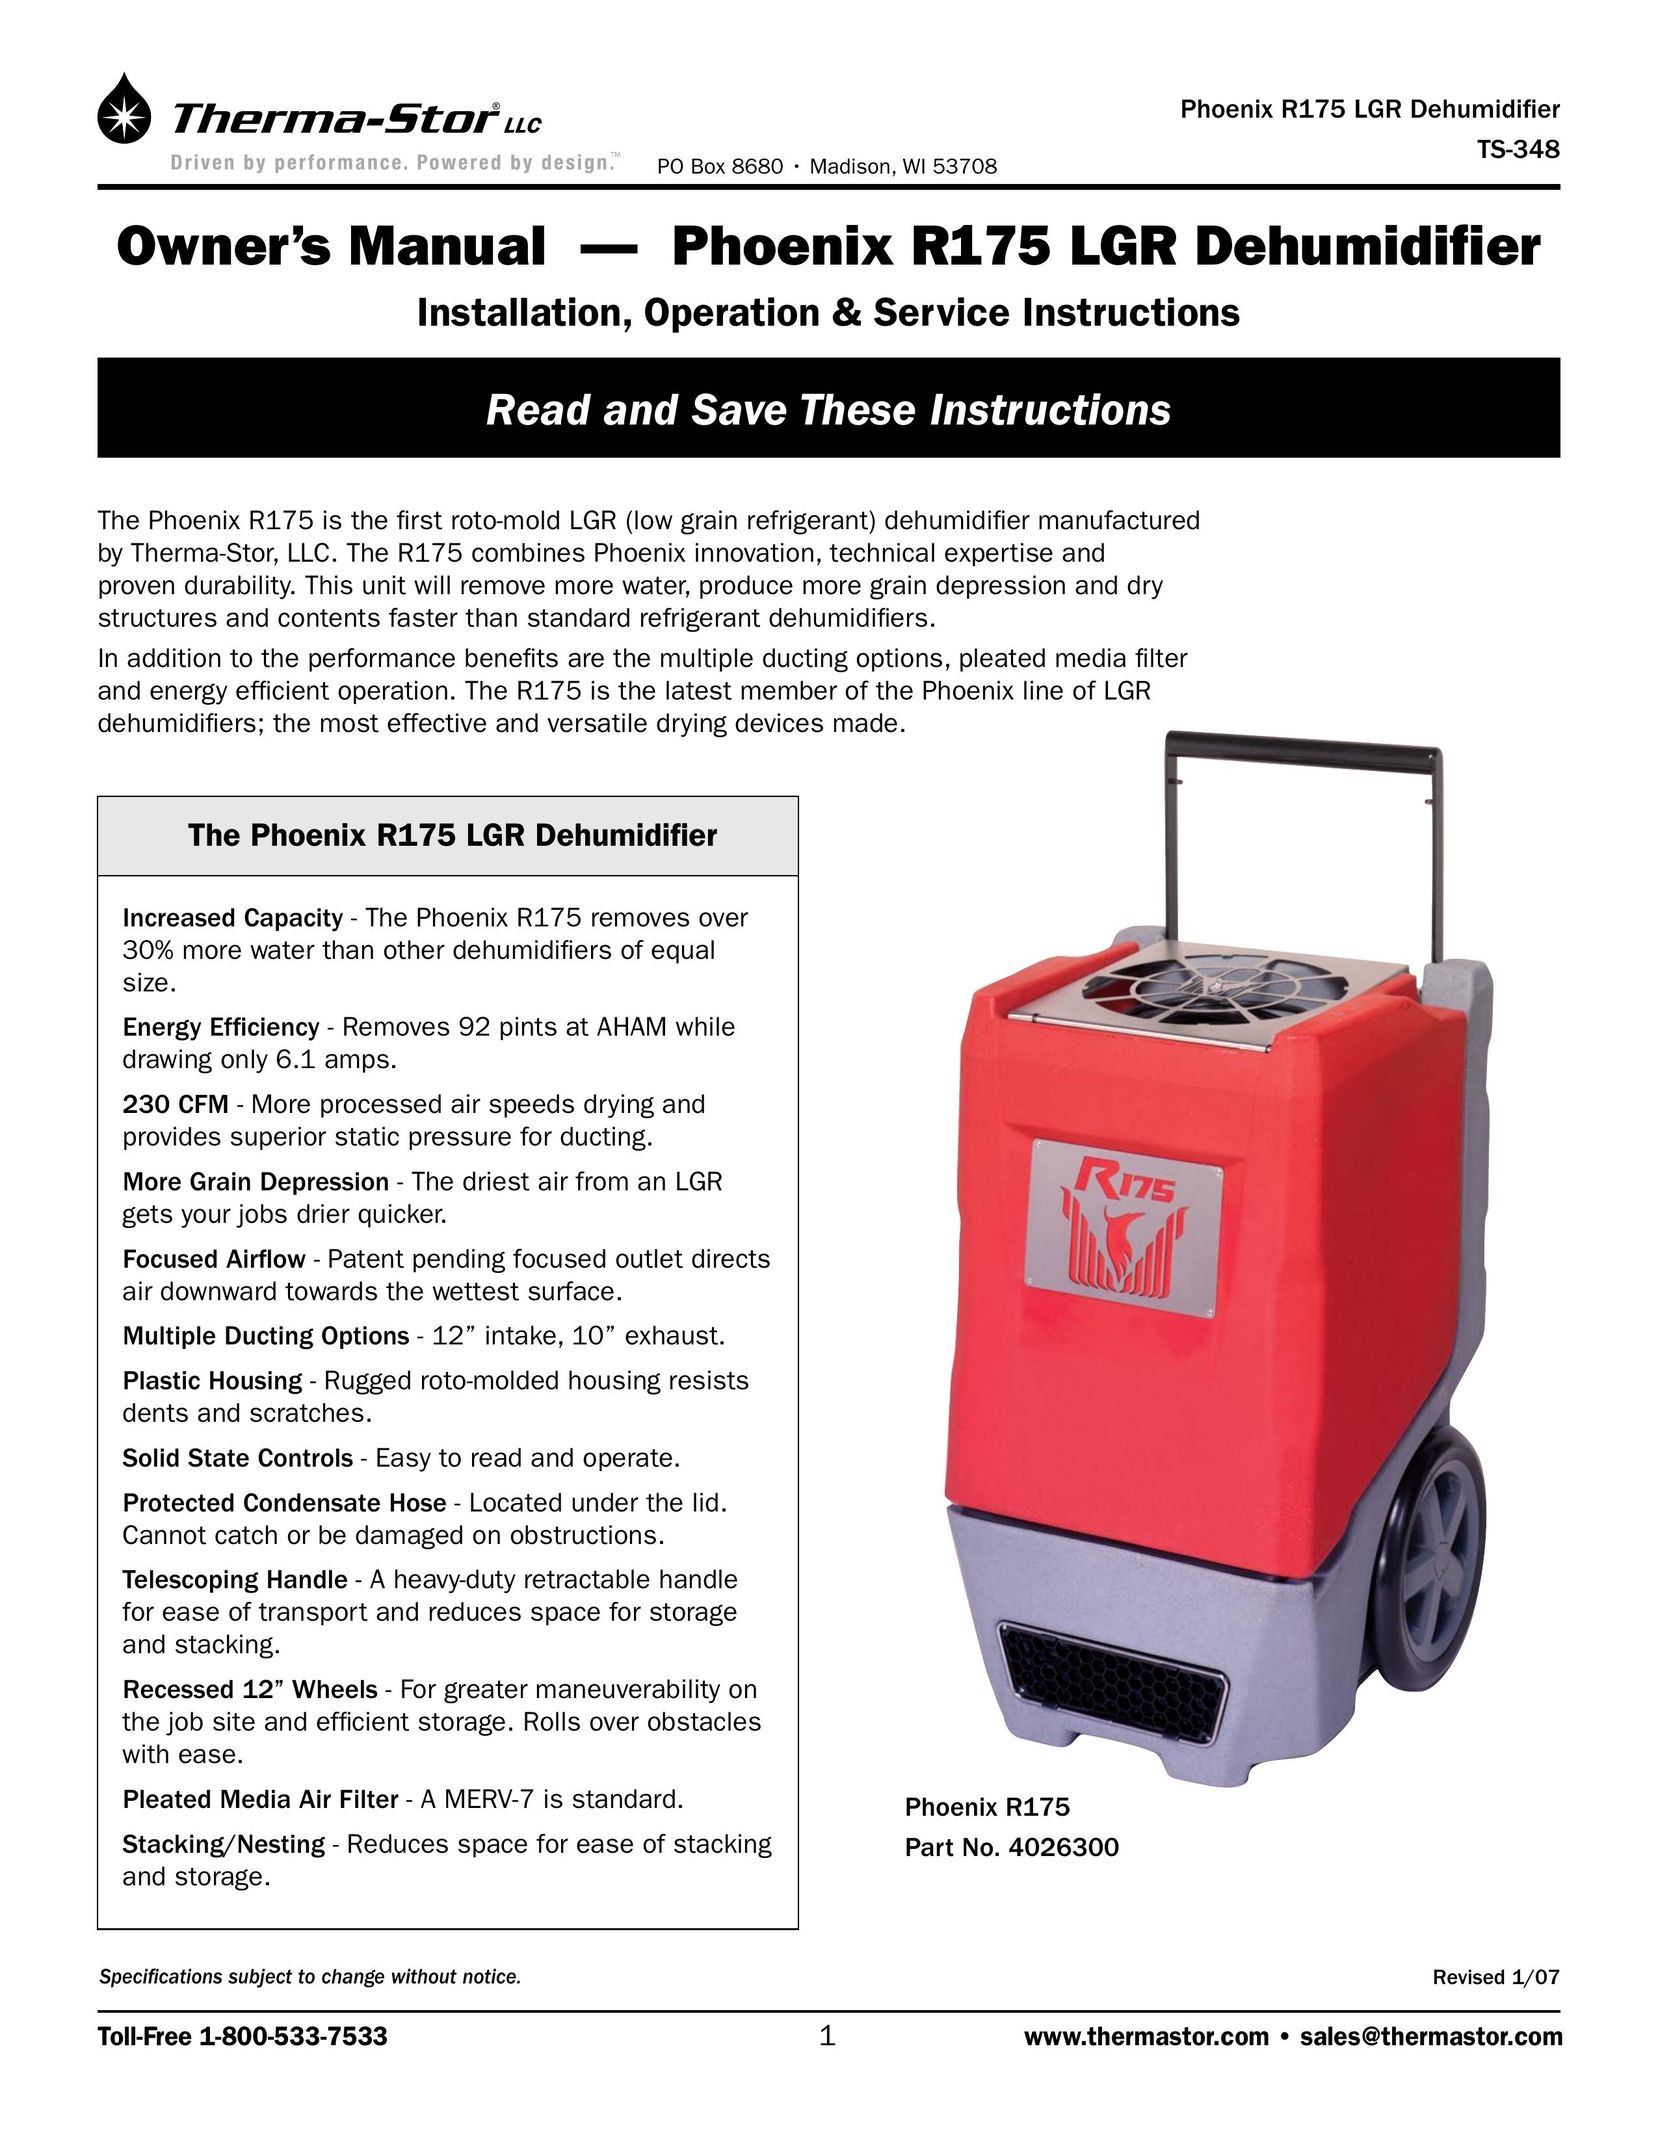 Therma-Stor Products Group R175 Dehumidifier User Manual